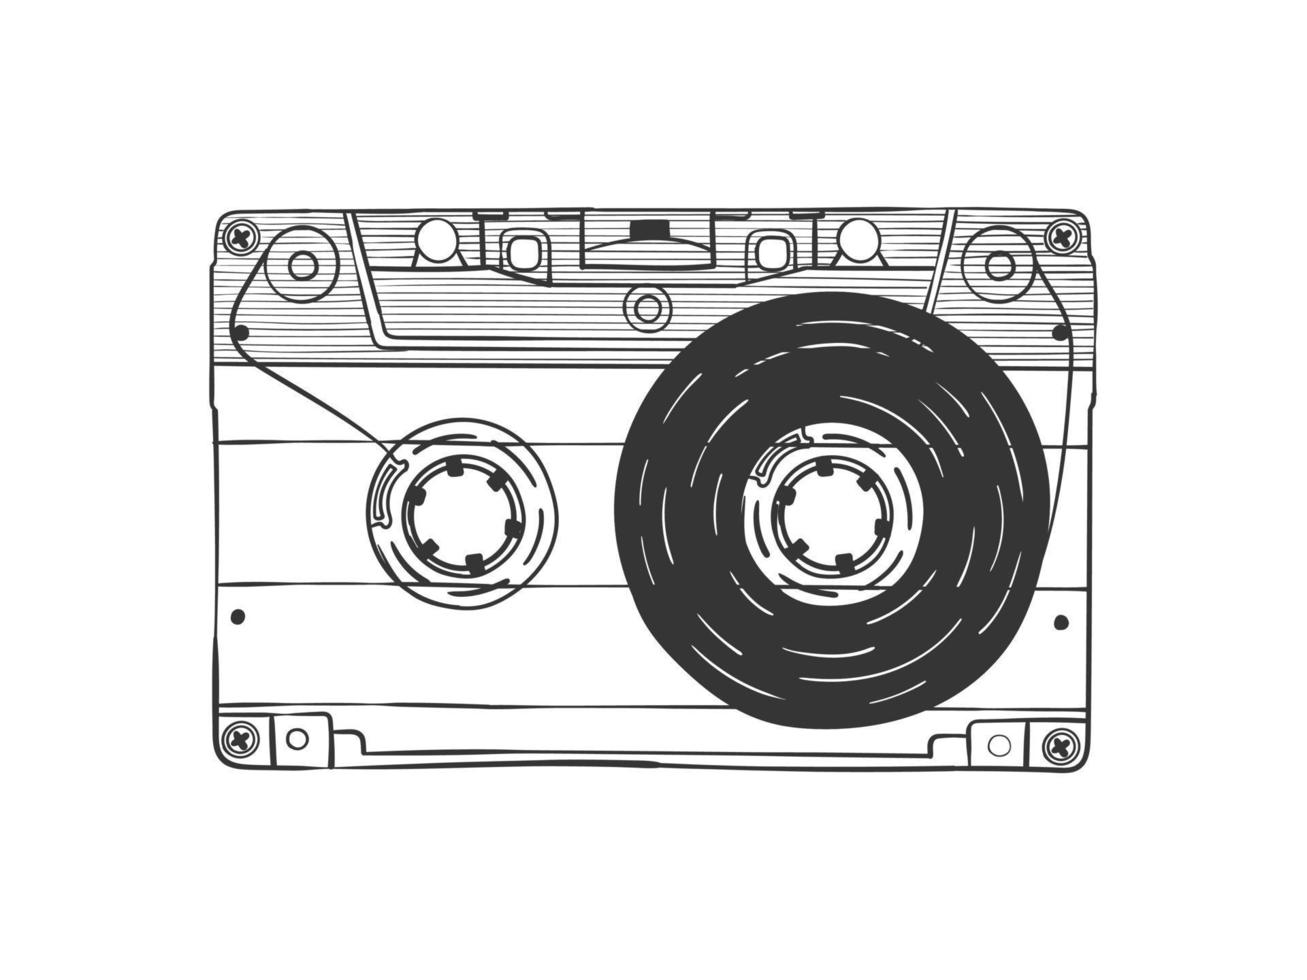 Audio cassette. Compact Cassette. Hand drawn audio cassette. Illustration in sketch style. Vector image